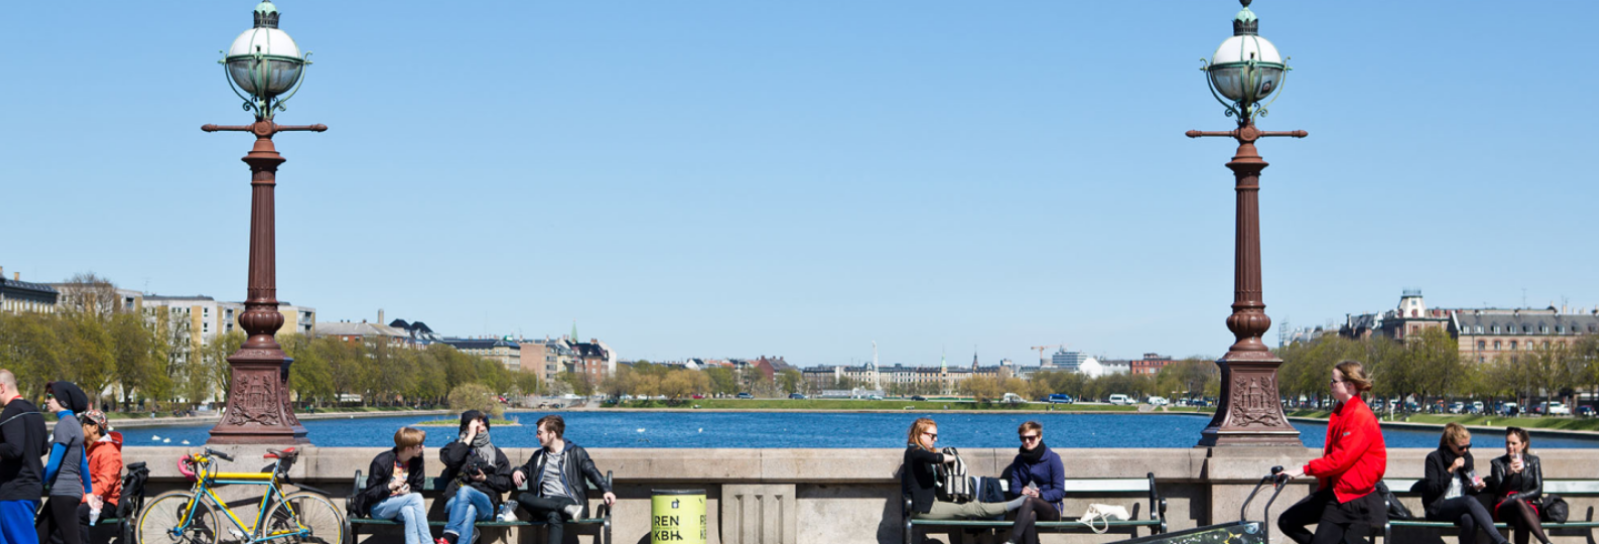 People sitting on the benches on Dronning Louise's Bridge and enjoying the sun, while a Christiania bike rides past